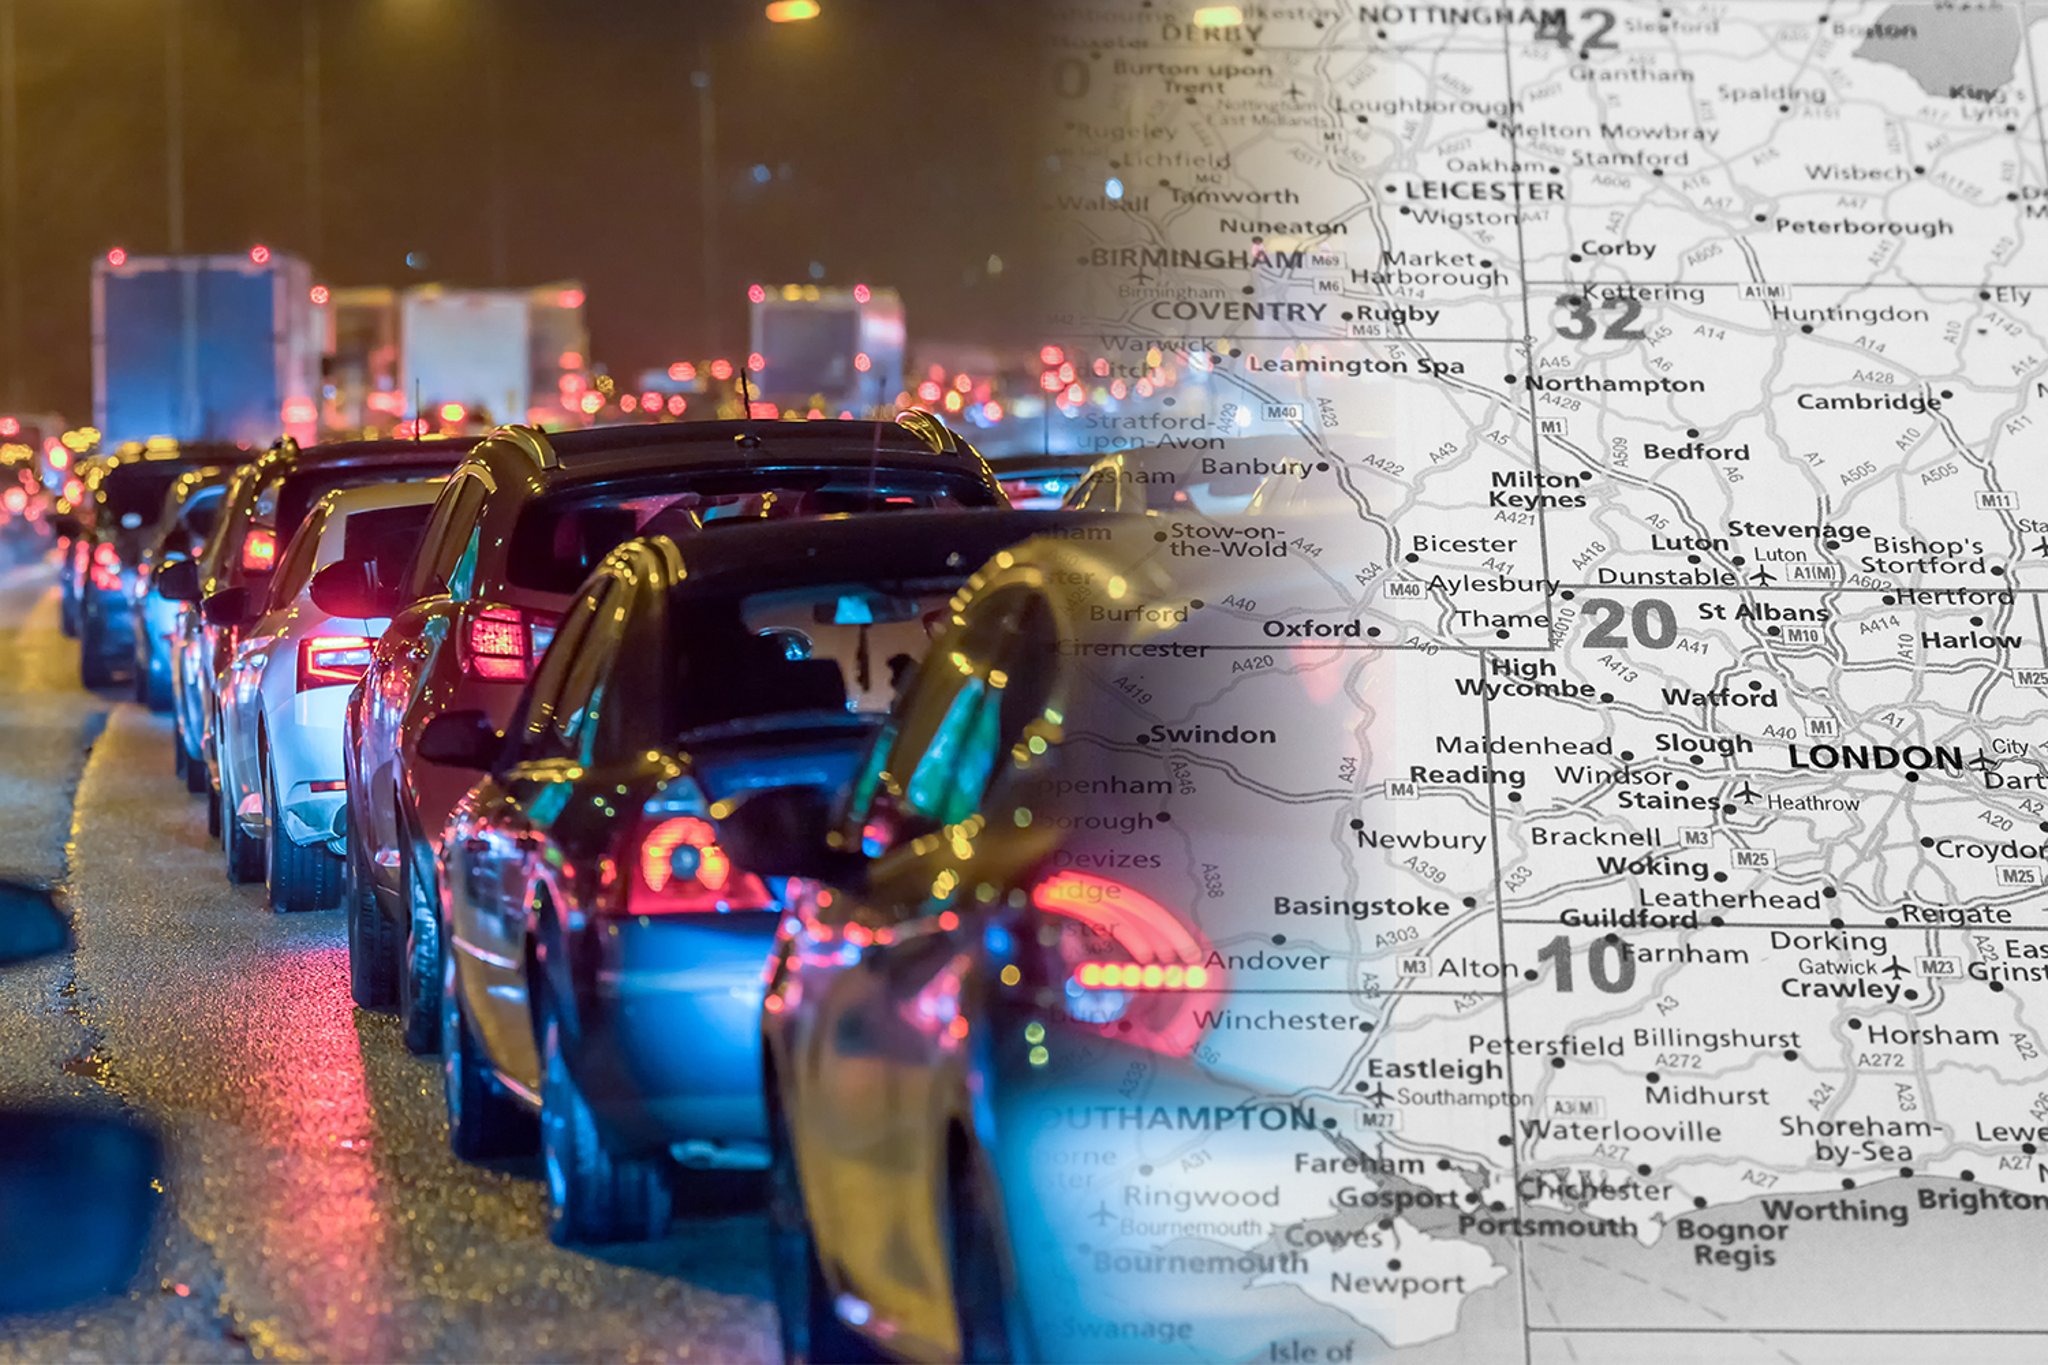 Expected Heavy Traffic Times Christmas Holiday 2022 Christmas Traffic To Be Worst For Five Years: These Are The Roads And Travel Times To Avoid | Nationalworld